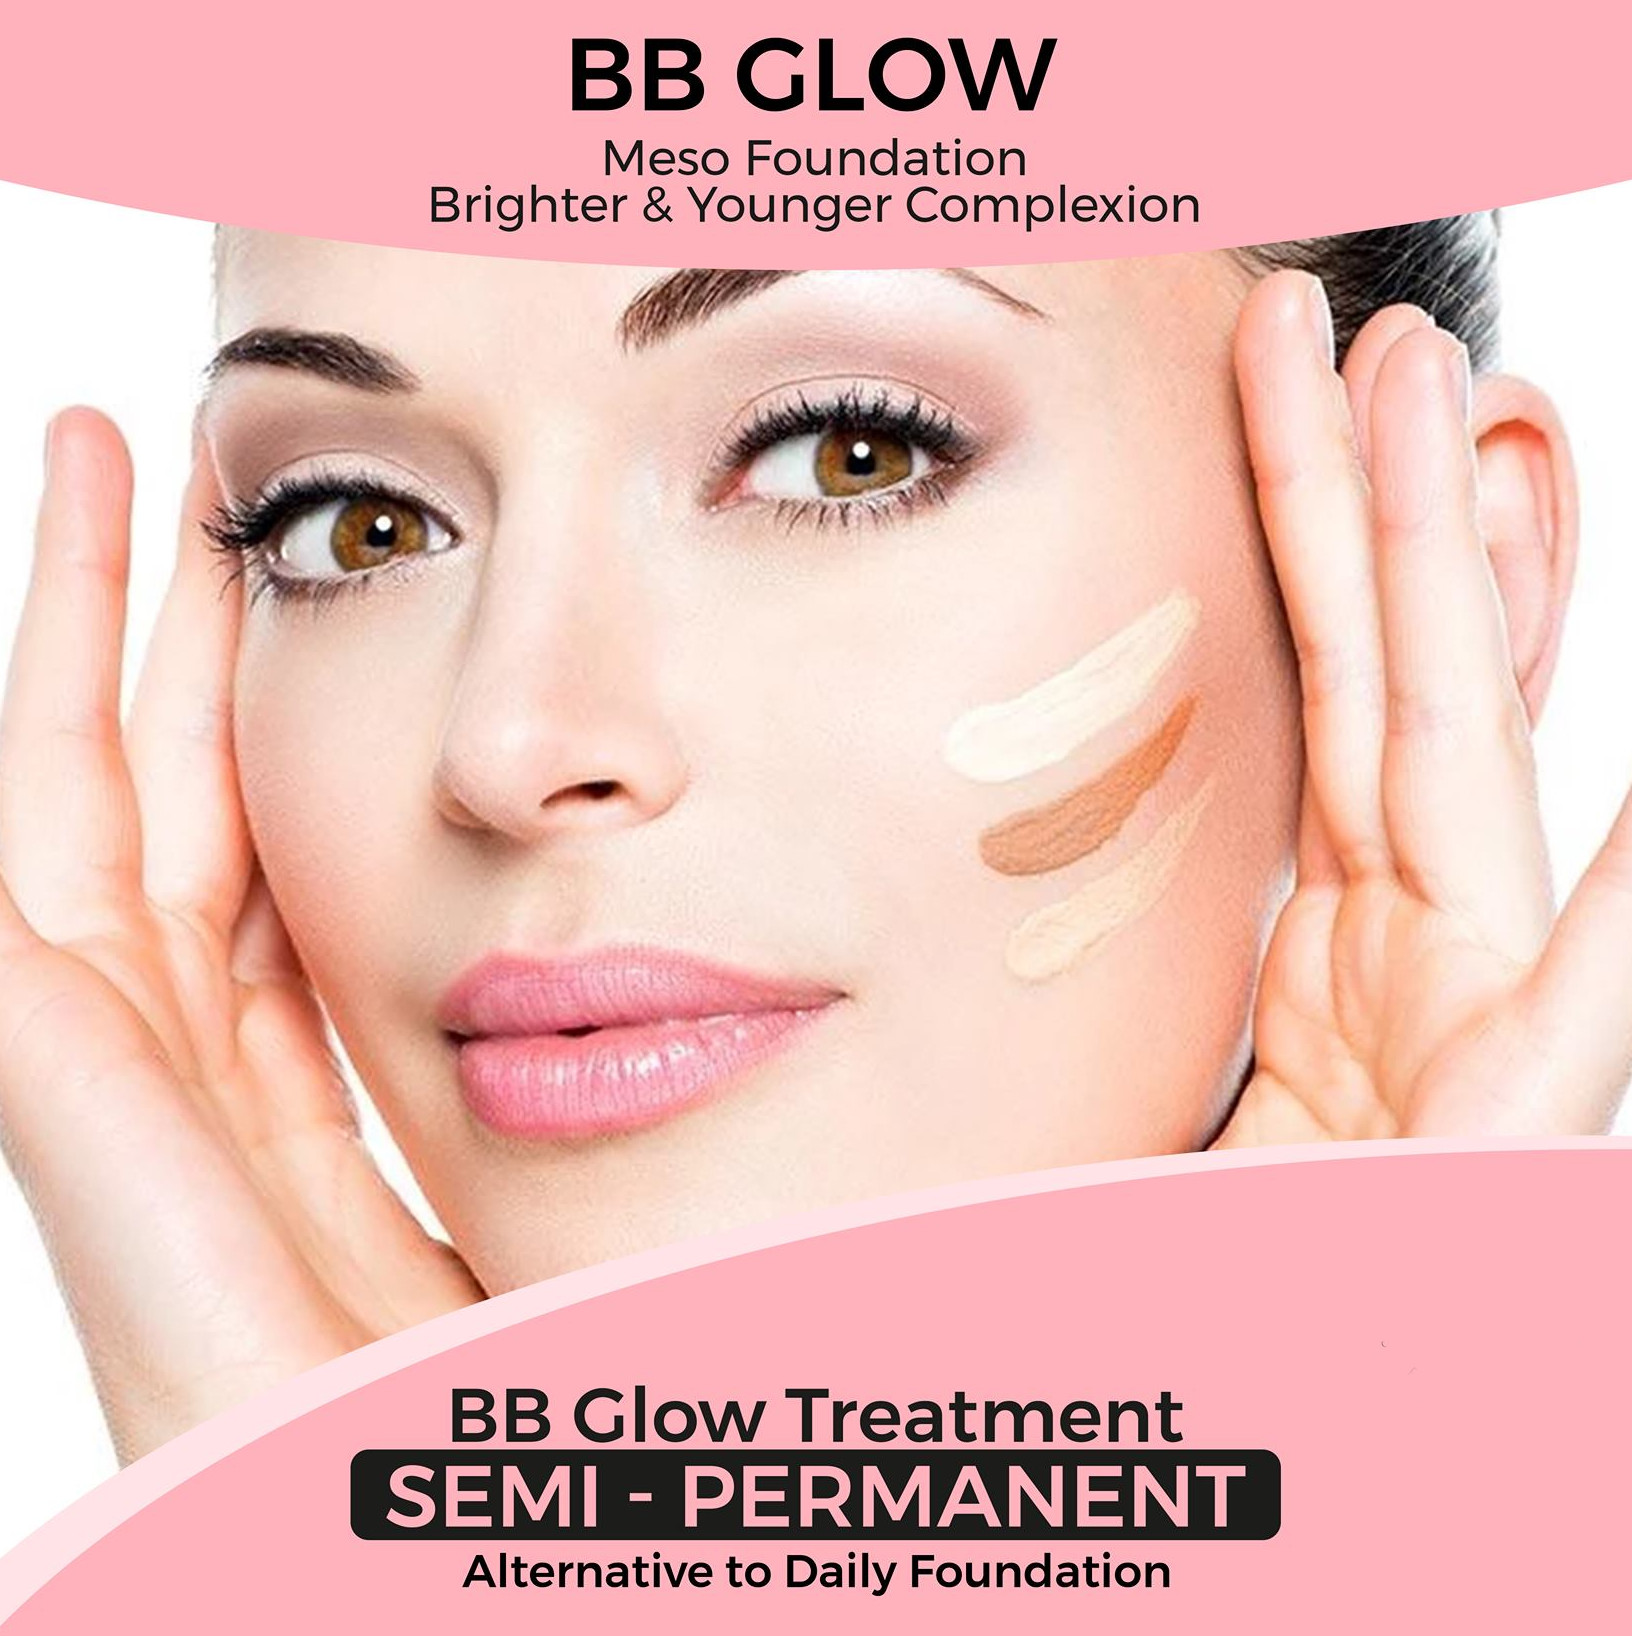 BB Glow Treatment in Whitefield at Envy Aesthetics | Envy Aesthetics | BB Glow Treatment in Whitefield, Best BB Glow Treatment in Whitefield, BB Glow Facial in Whitefield, Best BB Glow Facial in Whitefield - GL111115